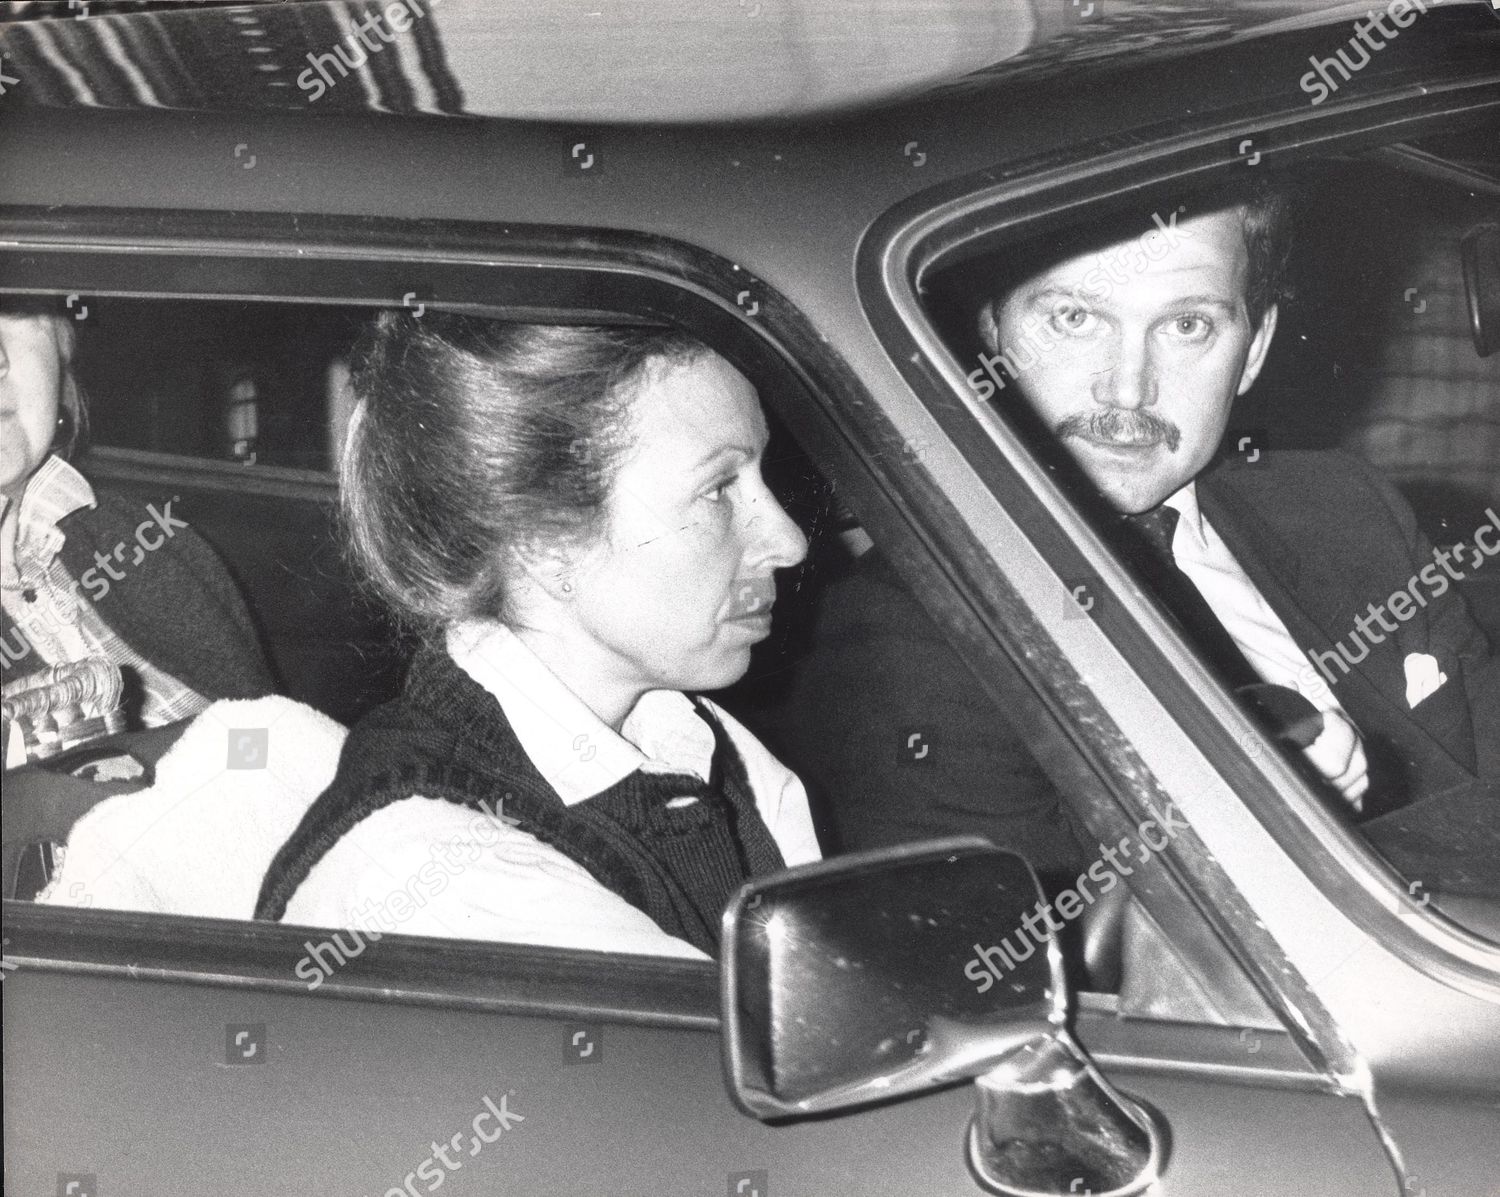 princess-anne-now-princess-royal-1988-picture-shows-princess-anne-leaving-buckingham-palace-after-charles-got-involved-in-a-skiing-accident-shutterstock-editorial-1052138a.jpg